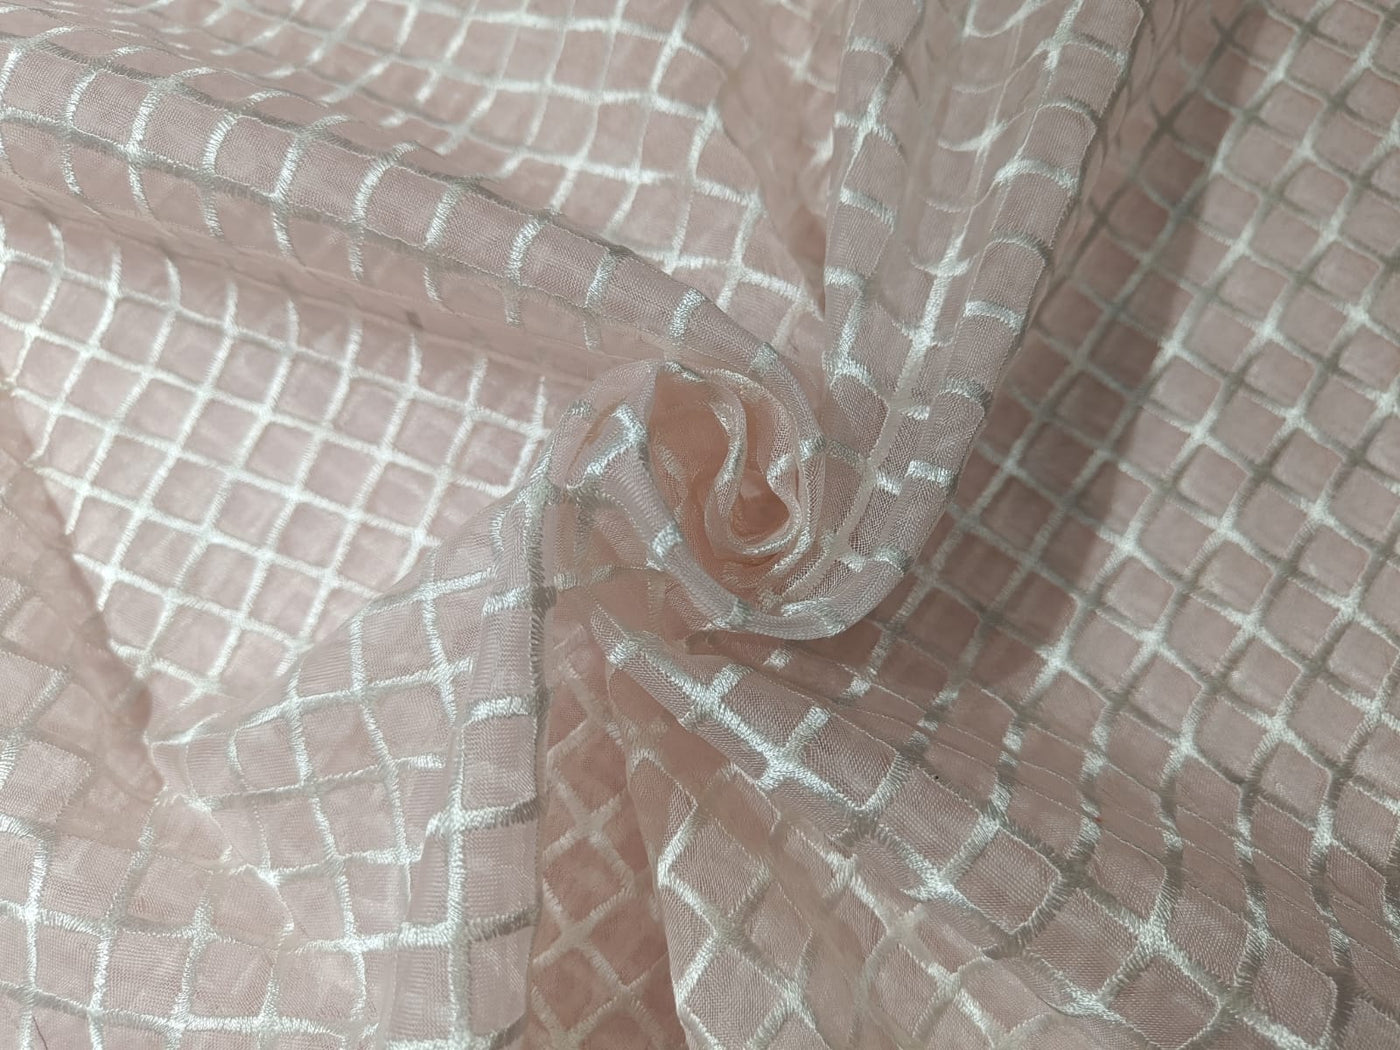 100 % Silk Organza Embroidery Plaid Semi Sheer Fabric 44" wide available in three colors